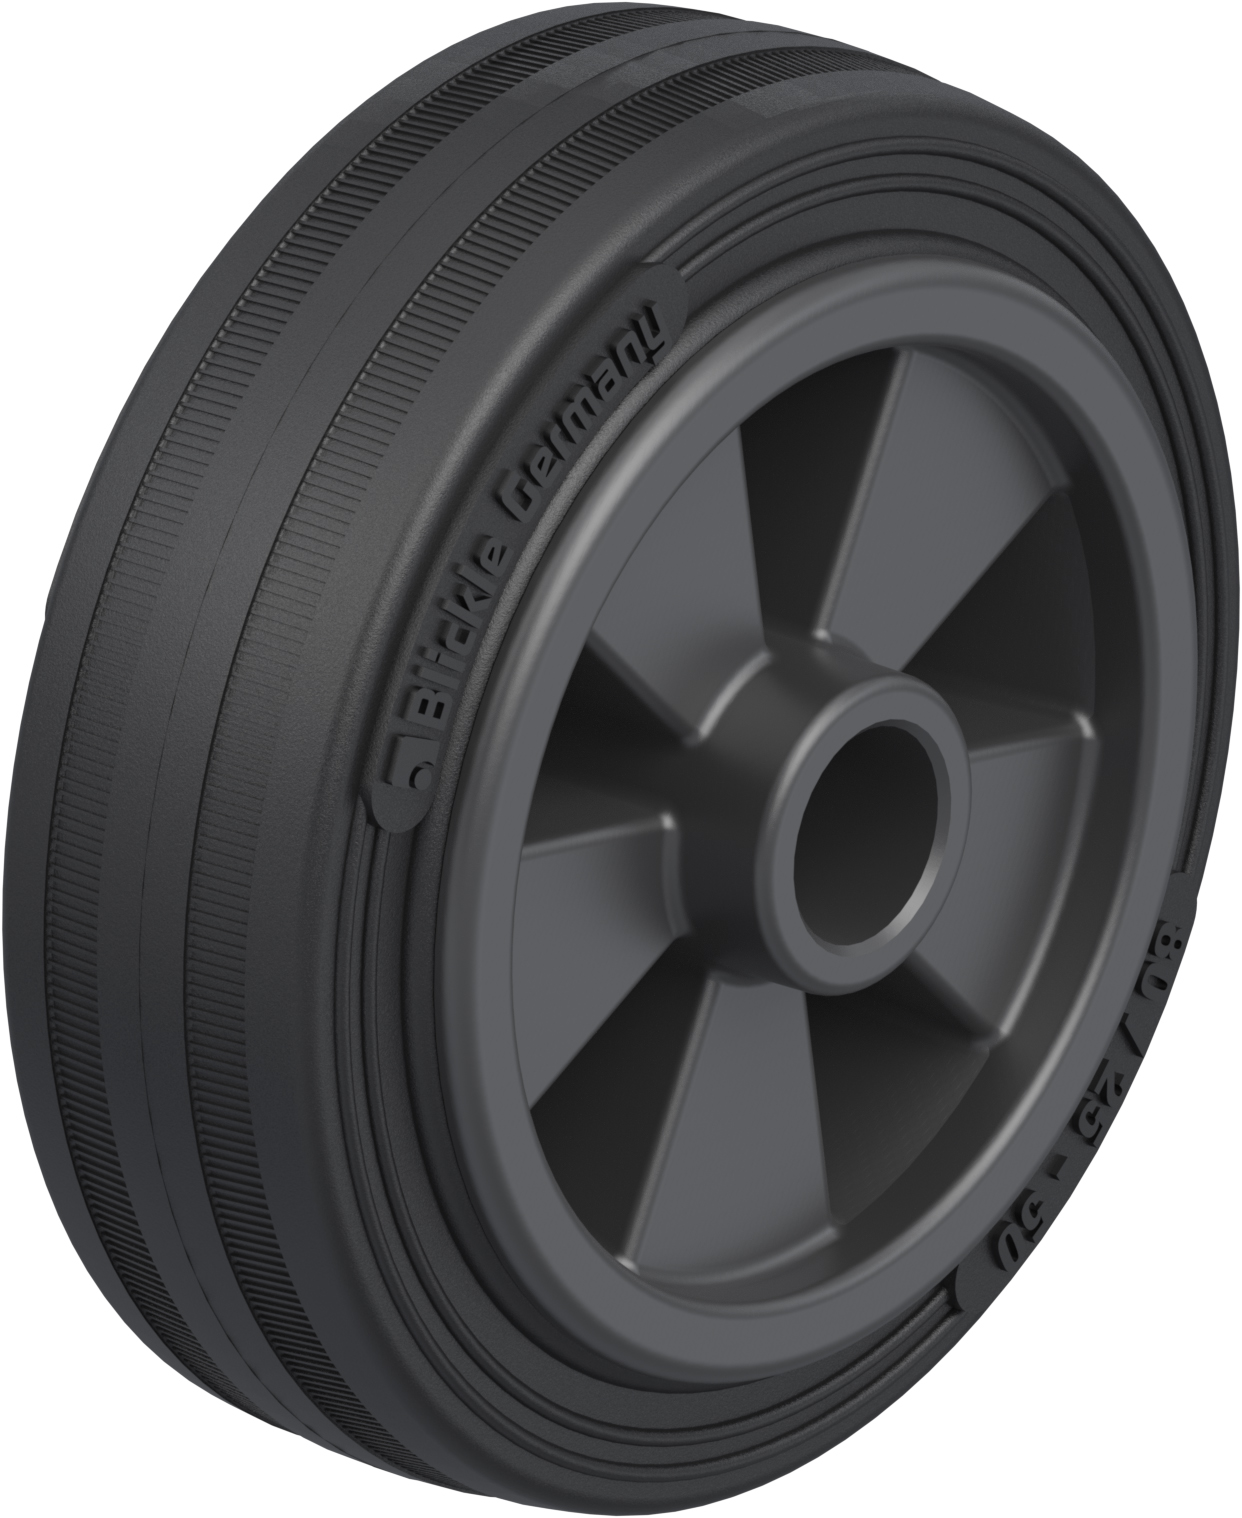 Standard solid rubber